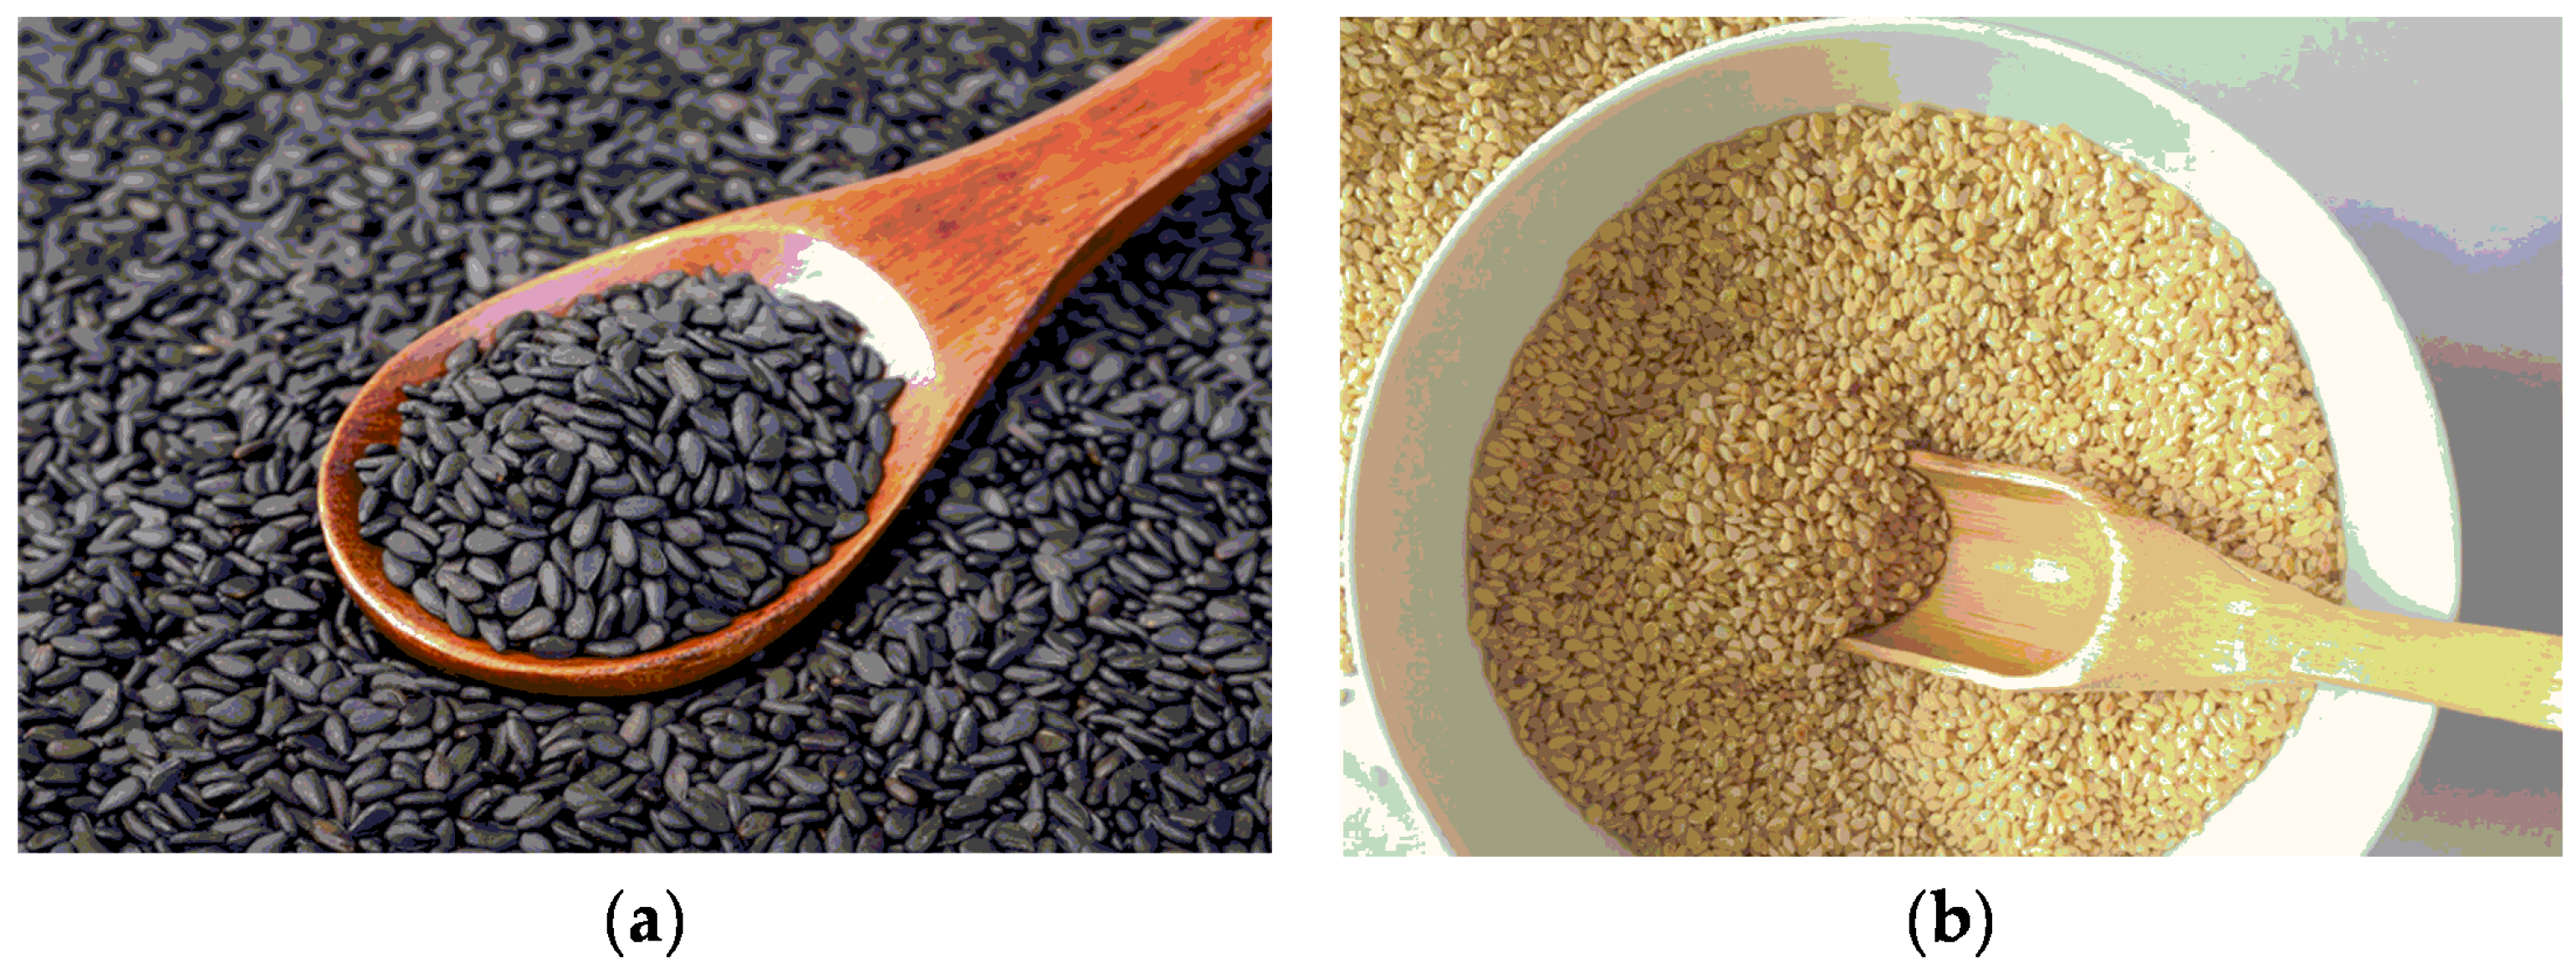 Sesame seeds: Benefits, risks, meal ideas, and more